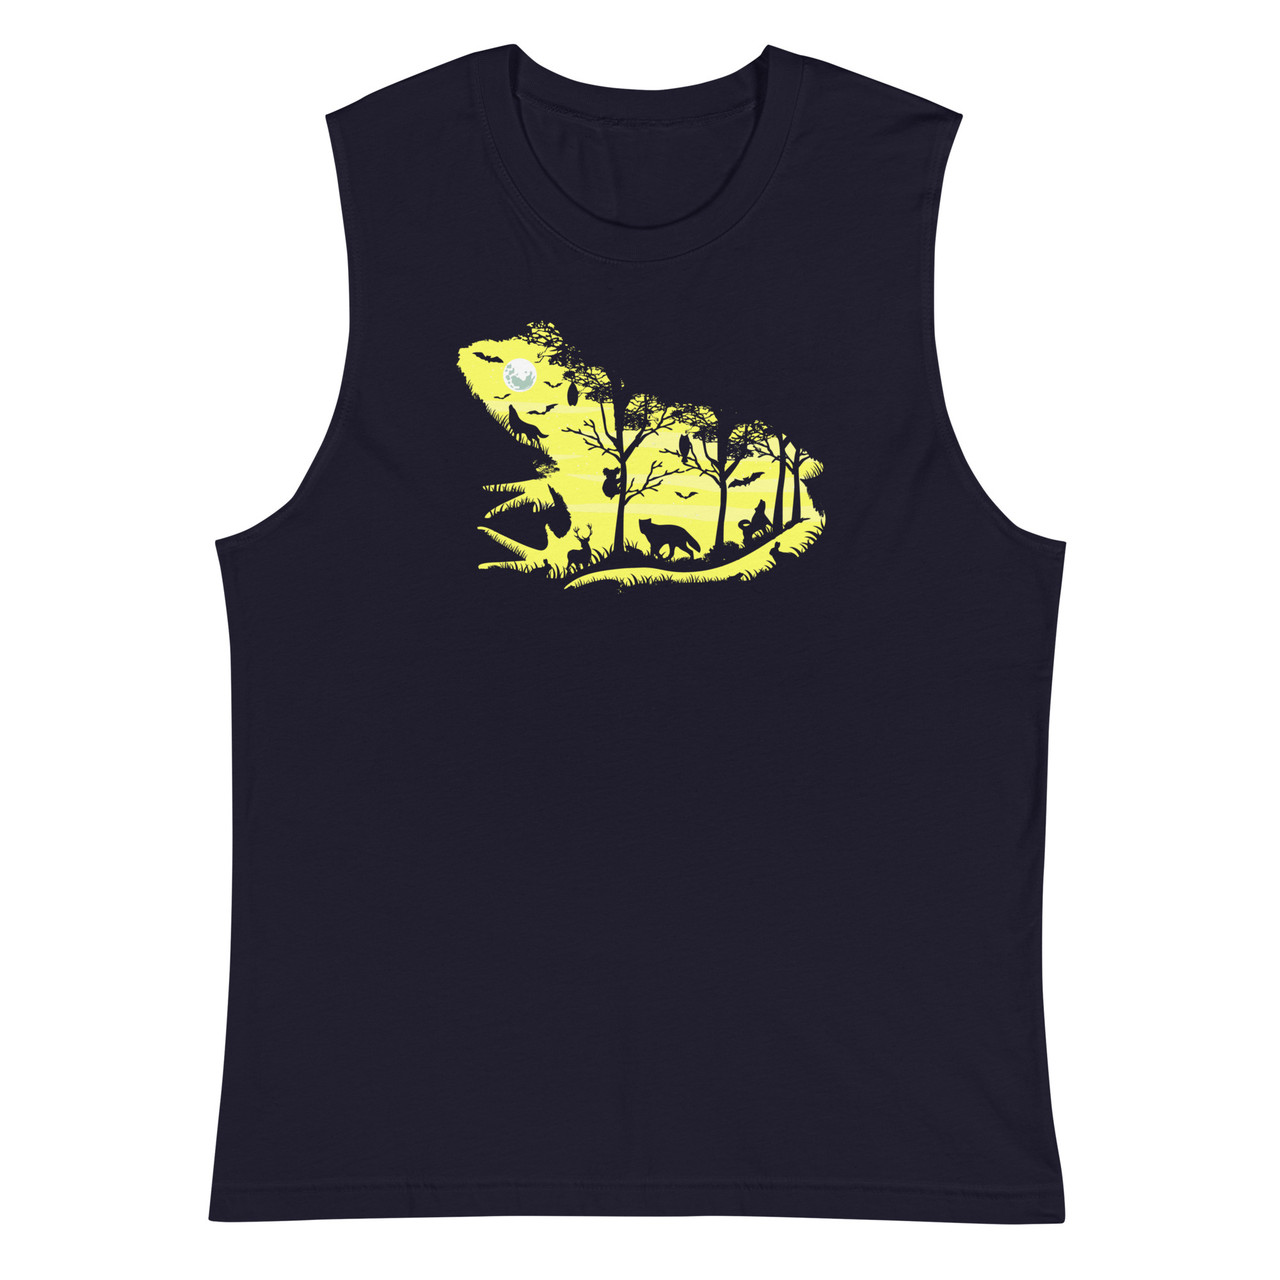 Froggy Silhouette Unisex Muscle Shirt - Bella + Canvas 3483 